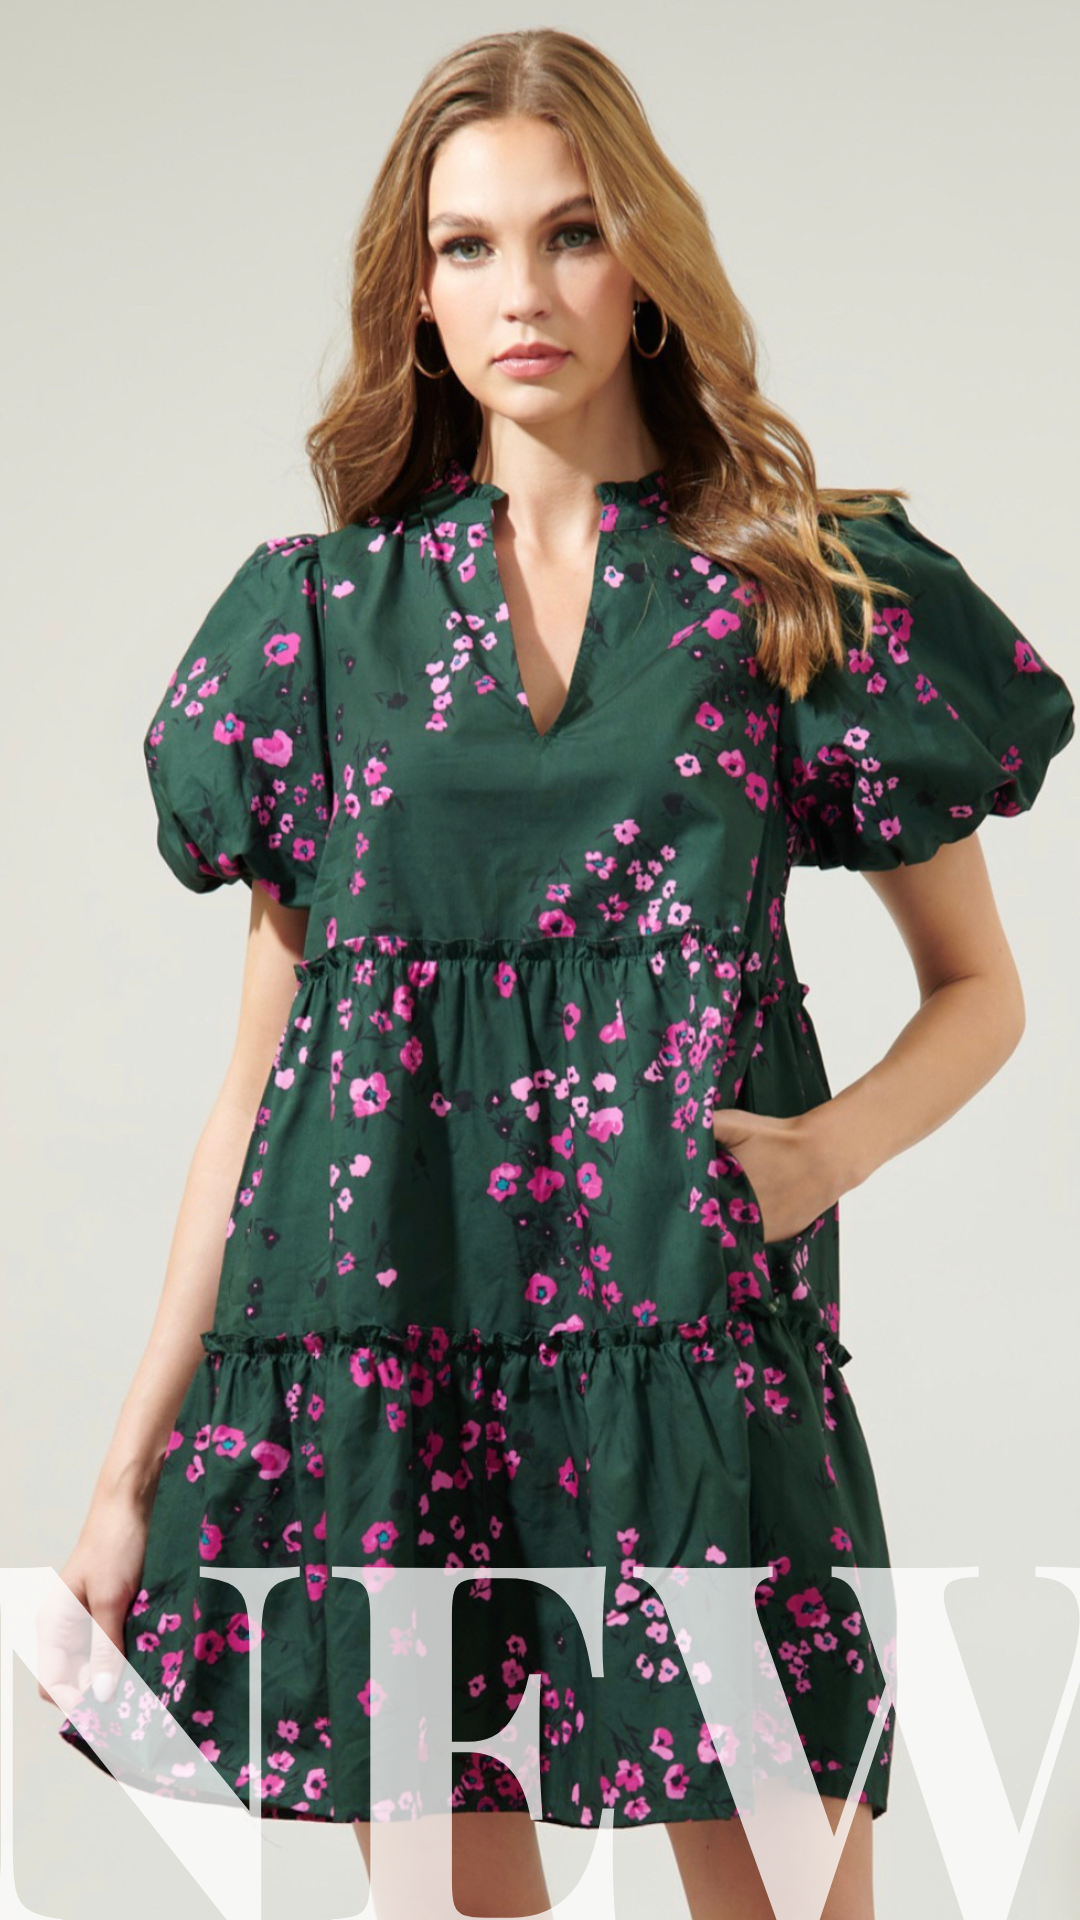 The MaryKate Dress